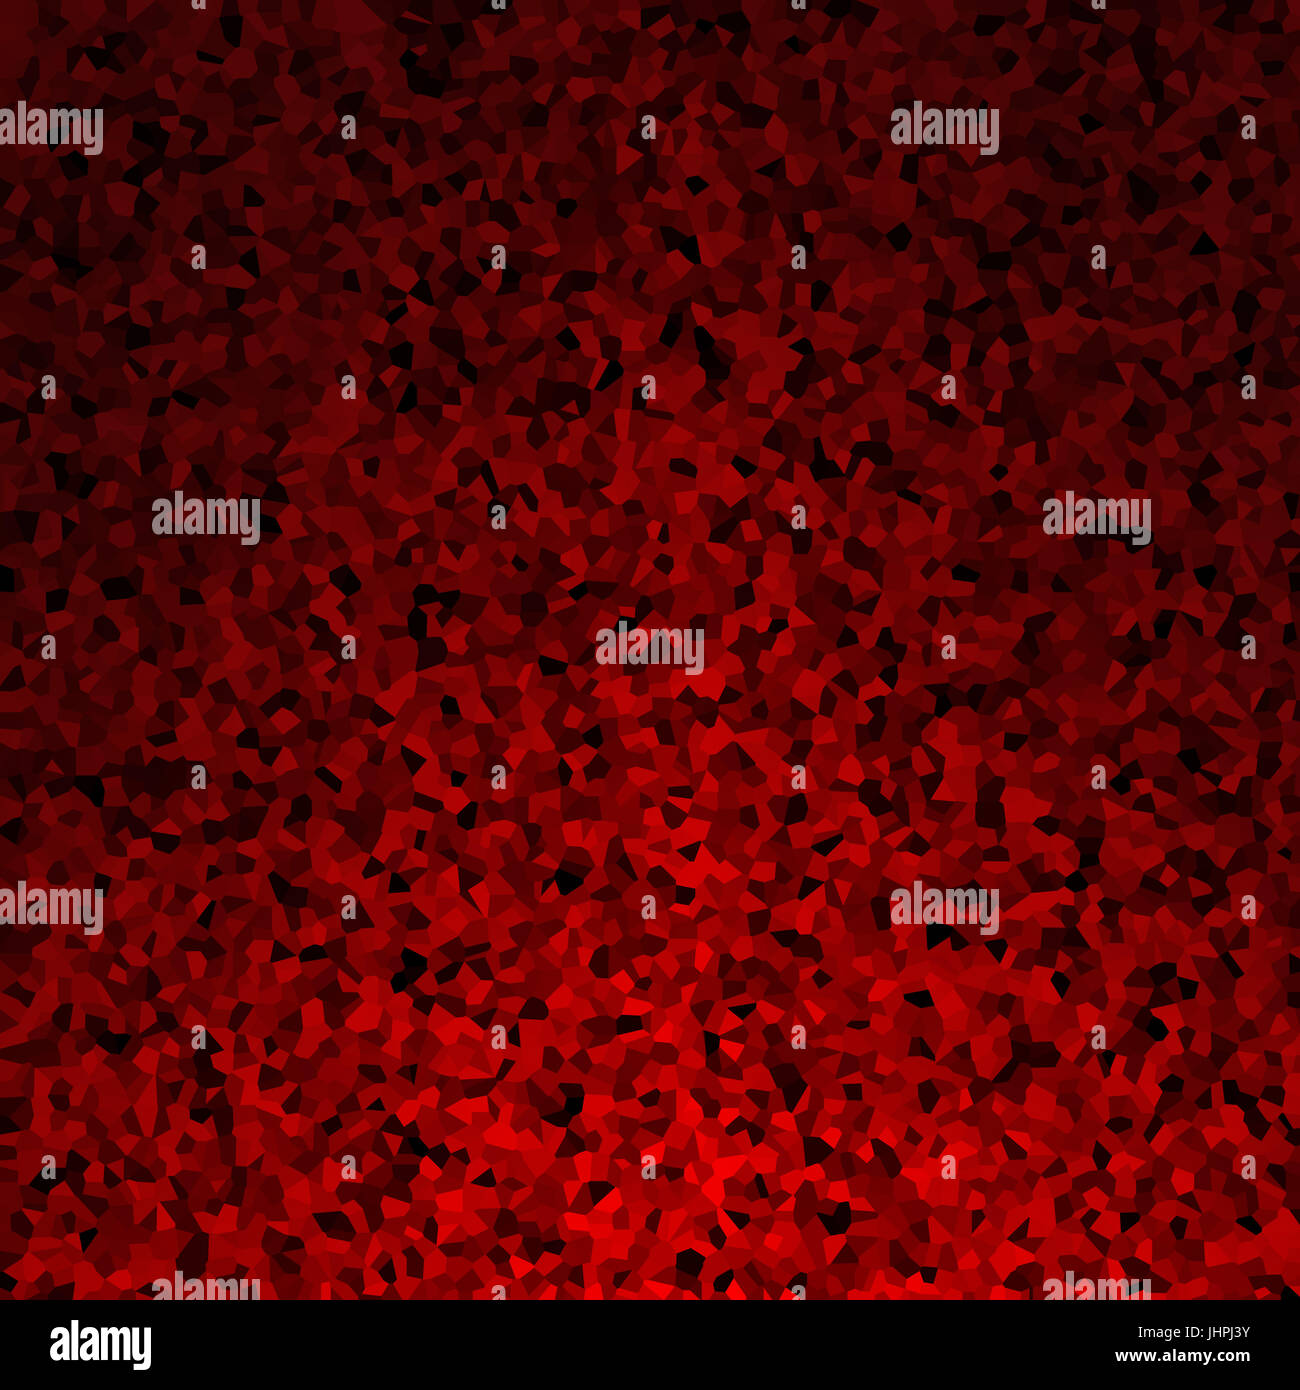 Hell red blue low poly camo like abstract background. Hell red abstract background. Low poly pattern Stock Photo